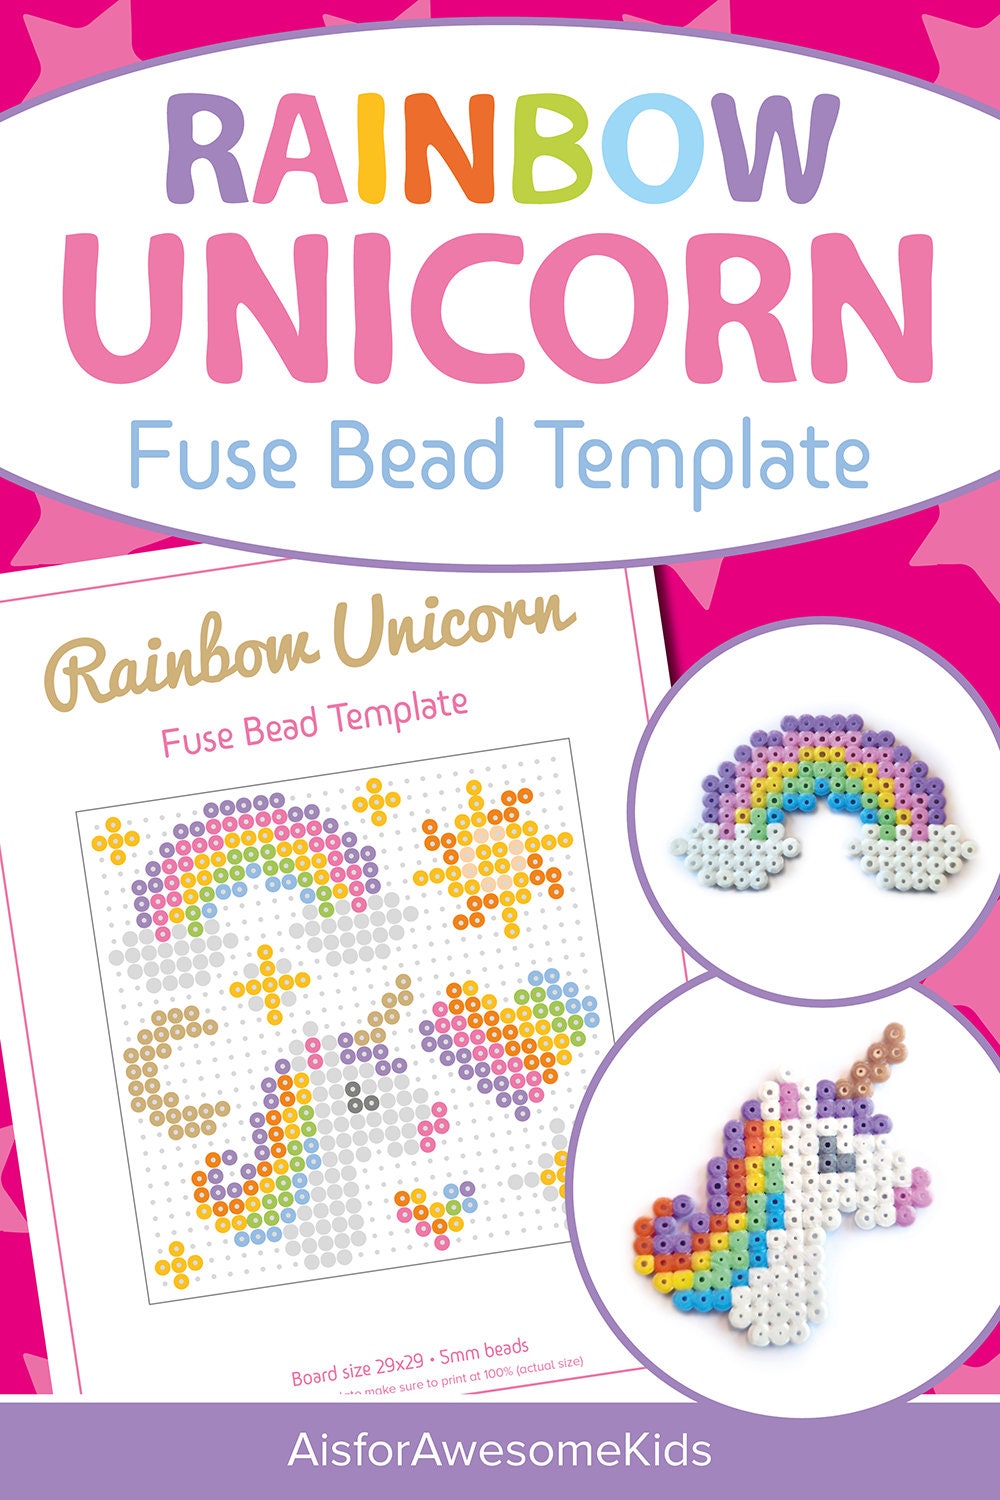 Unicorn & Butterfly Fuse Bead Template Bundle, Hearts and Flowers Bracelet  Craft Pattern, Hama Perler Magical Party Gift Pixel Art Printable 